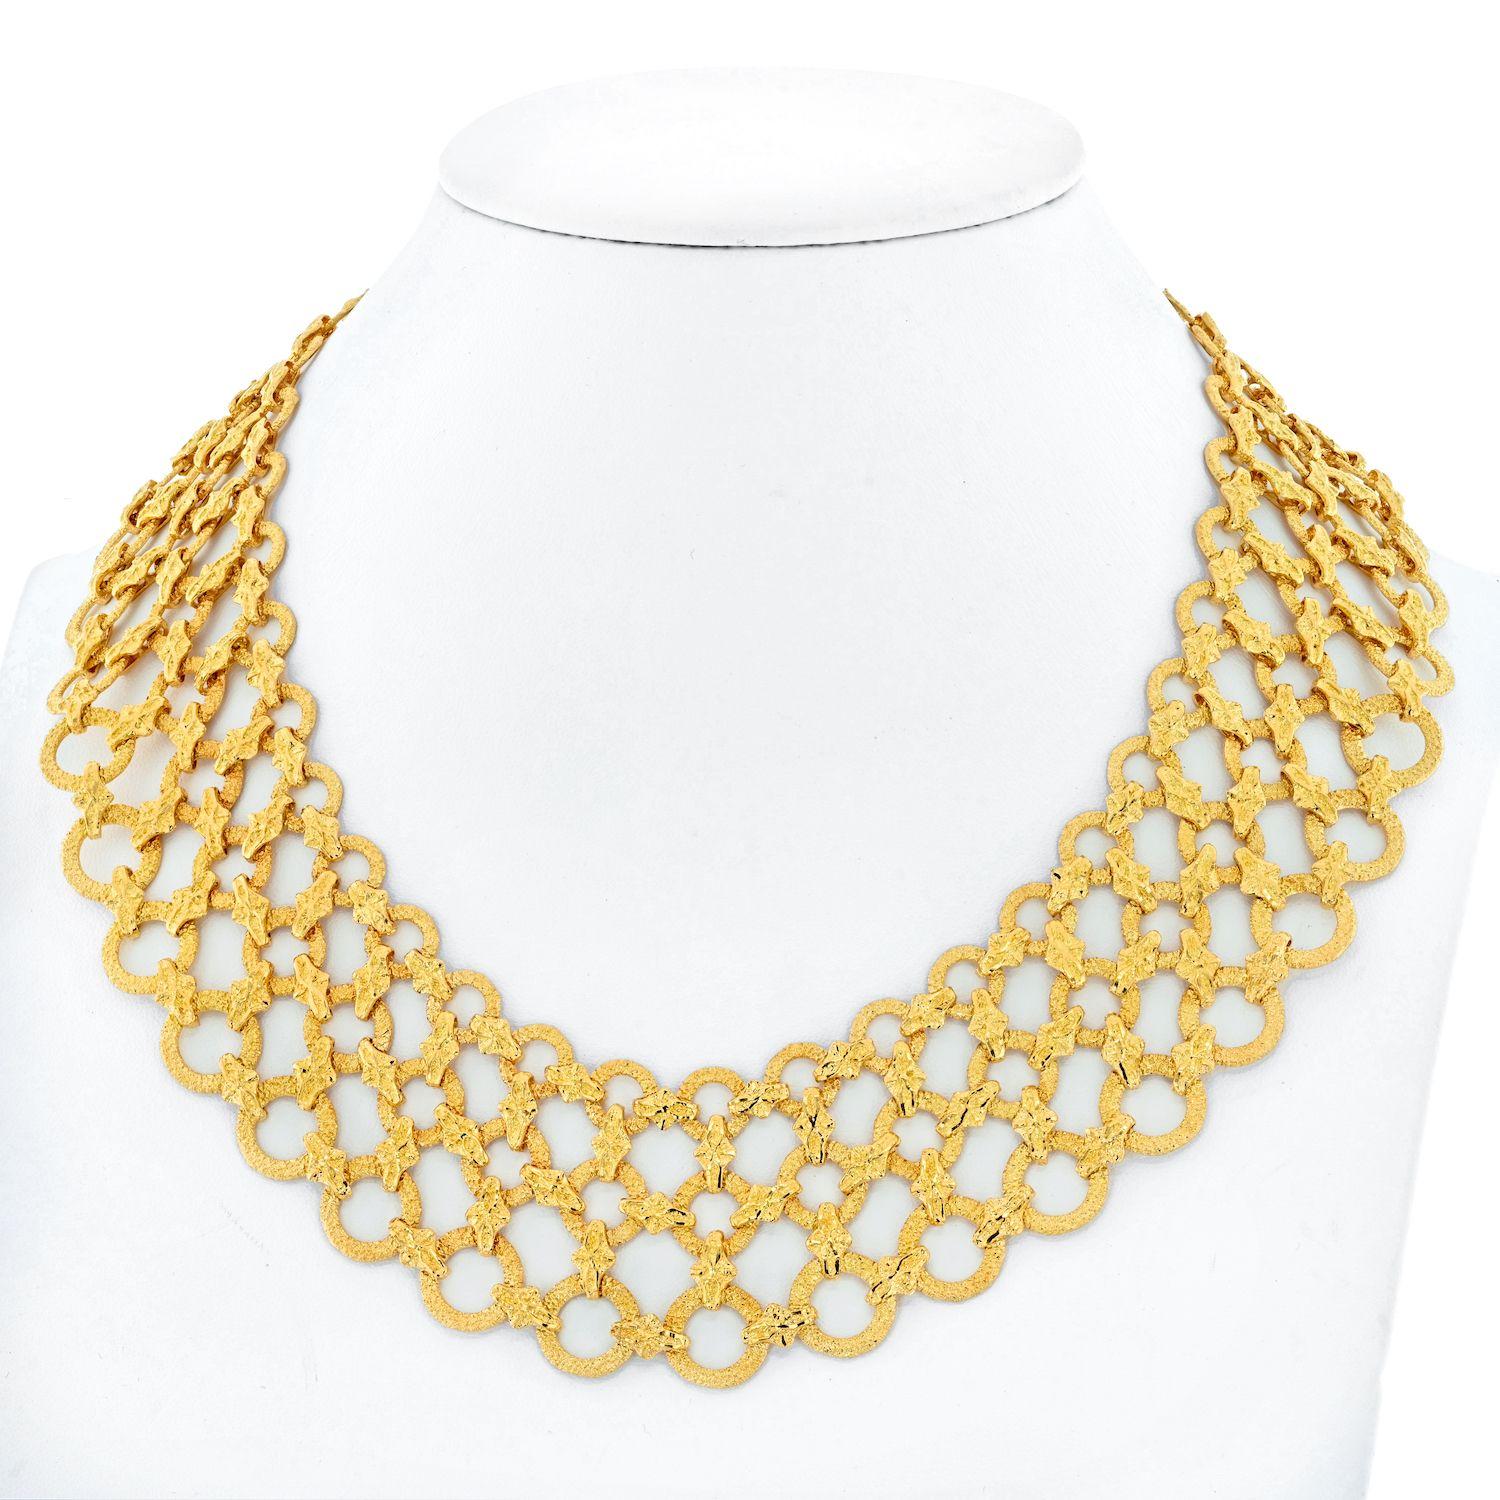 Verdura 18K Yellow Gold Openwork Bib Necklace.
Beautiful craftsmanship by Verdura never ceases to amaze us! This vintage 18k yellow gold collar bib is a perfect example of quality gold jewelry that wears and holds well regardelss of the era.